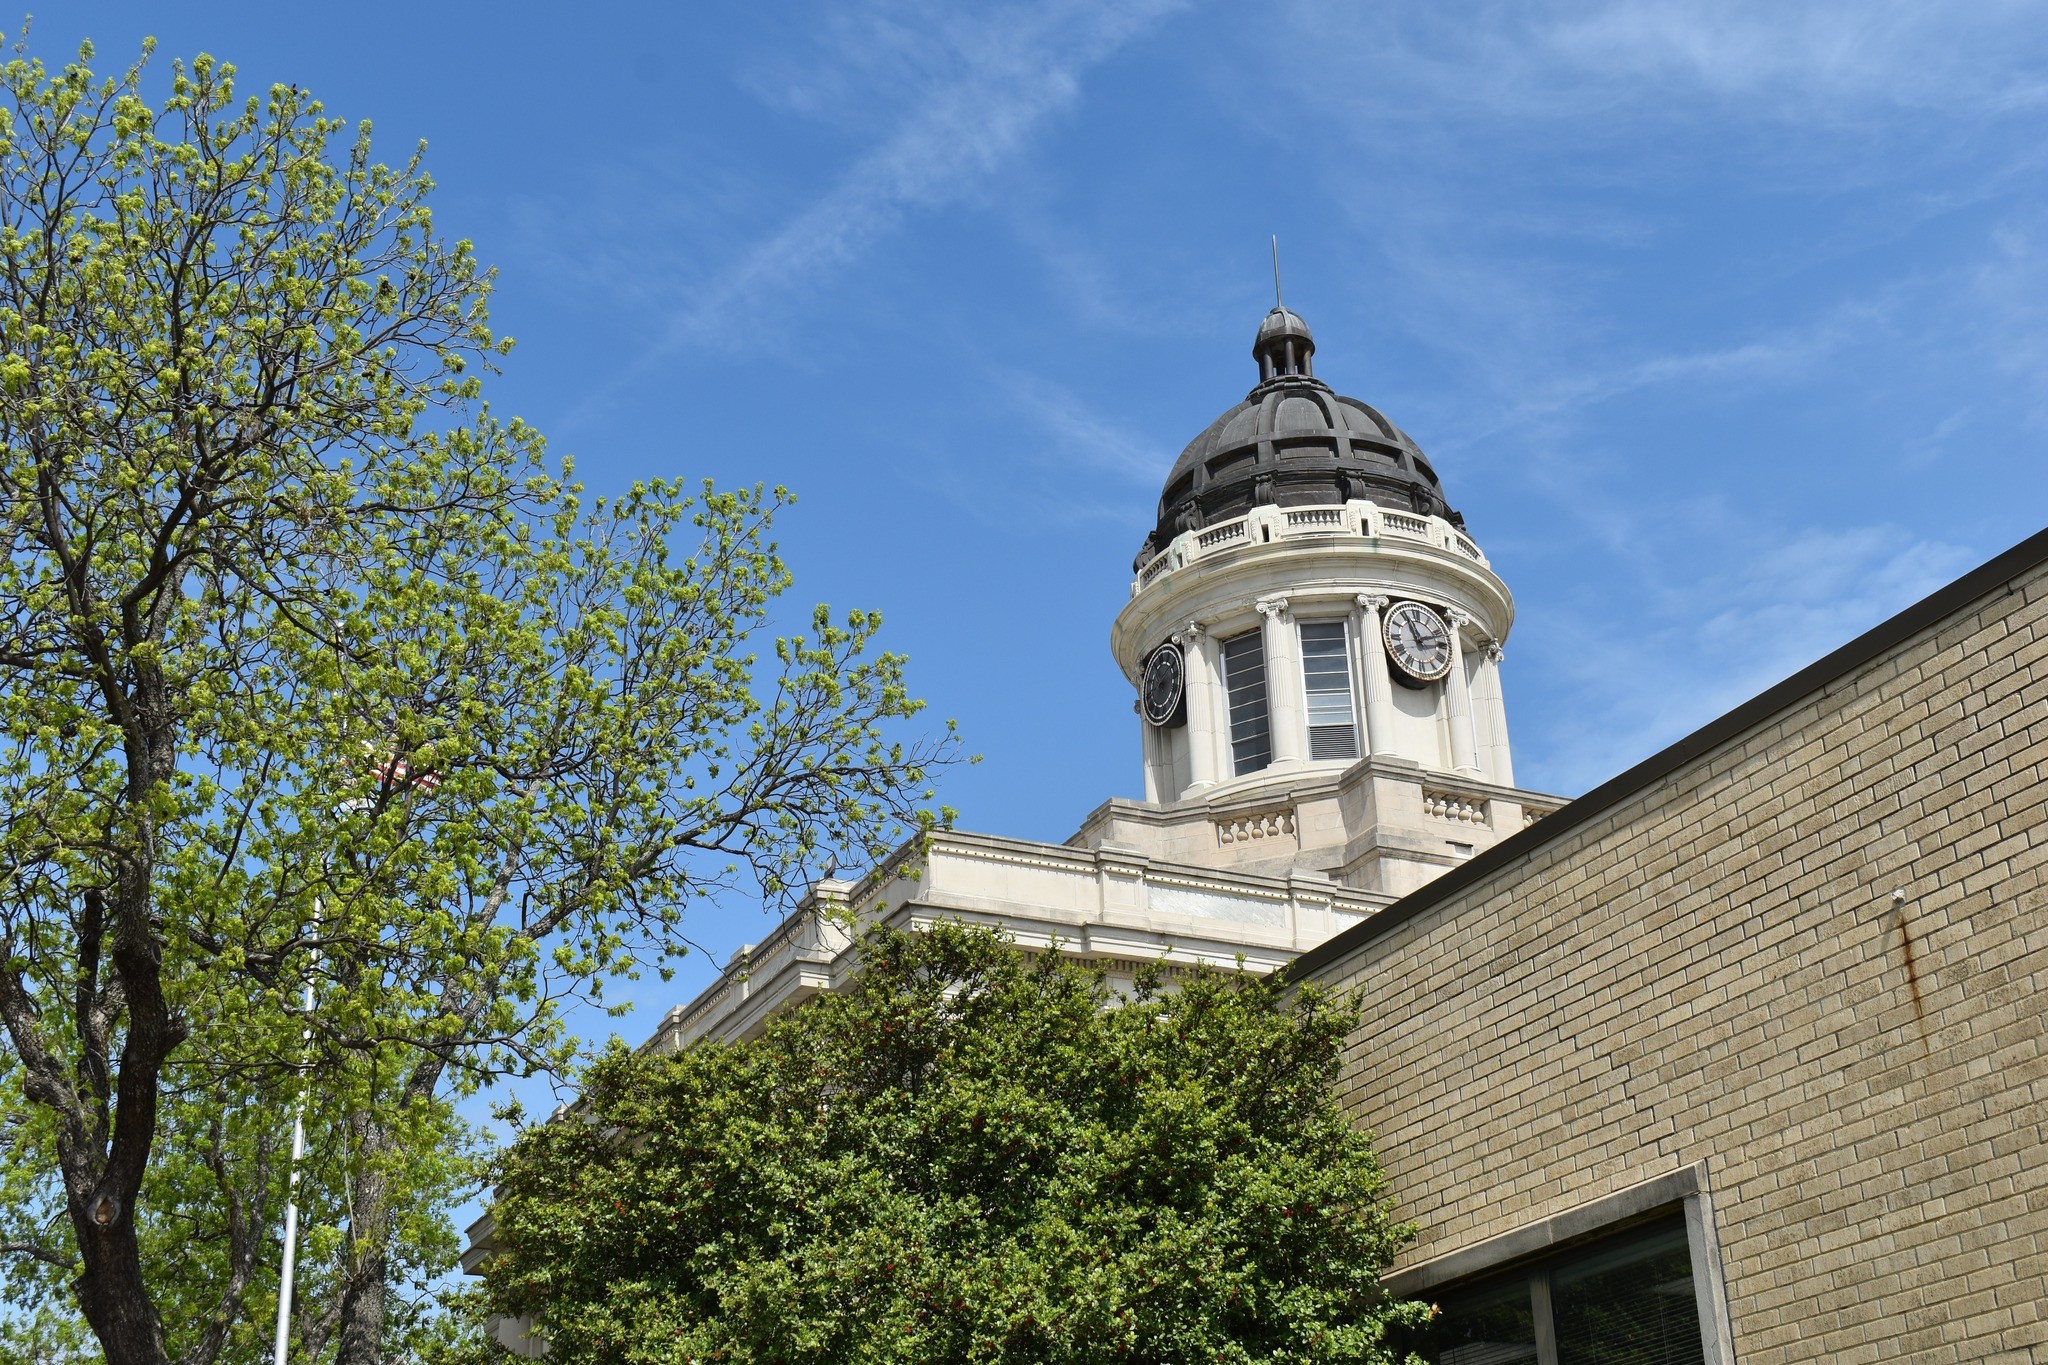 The dome of the Carter County Courthouse pierces the sky from behind a brick building, with trees and bushes in bloom on a spring day